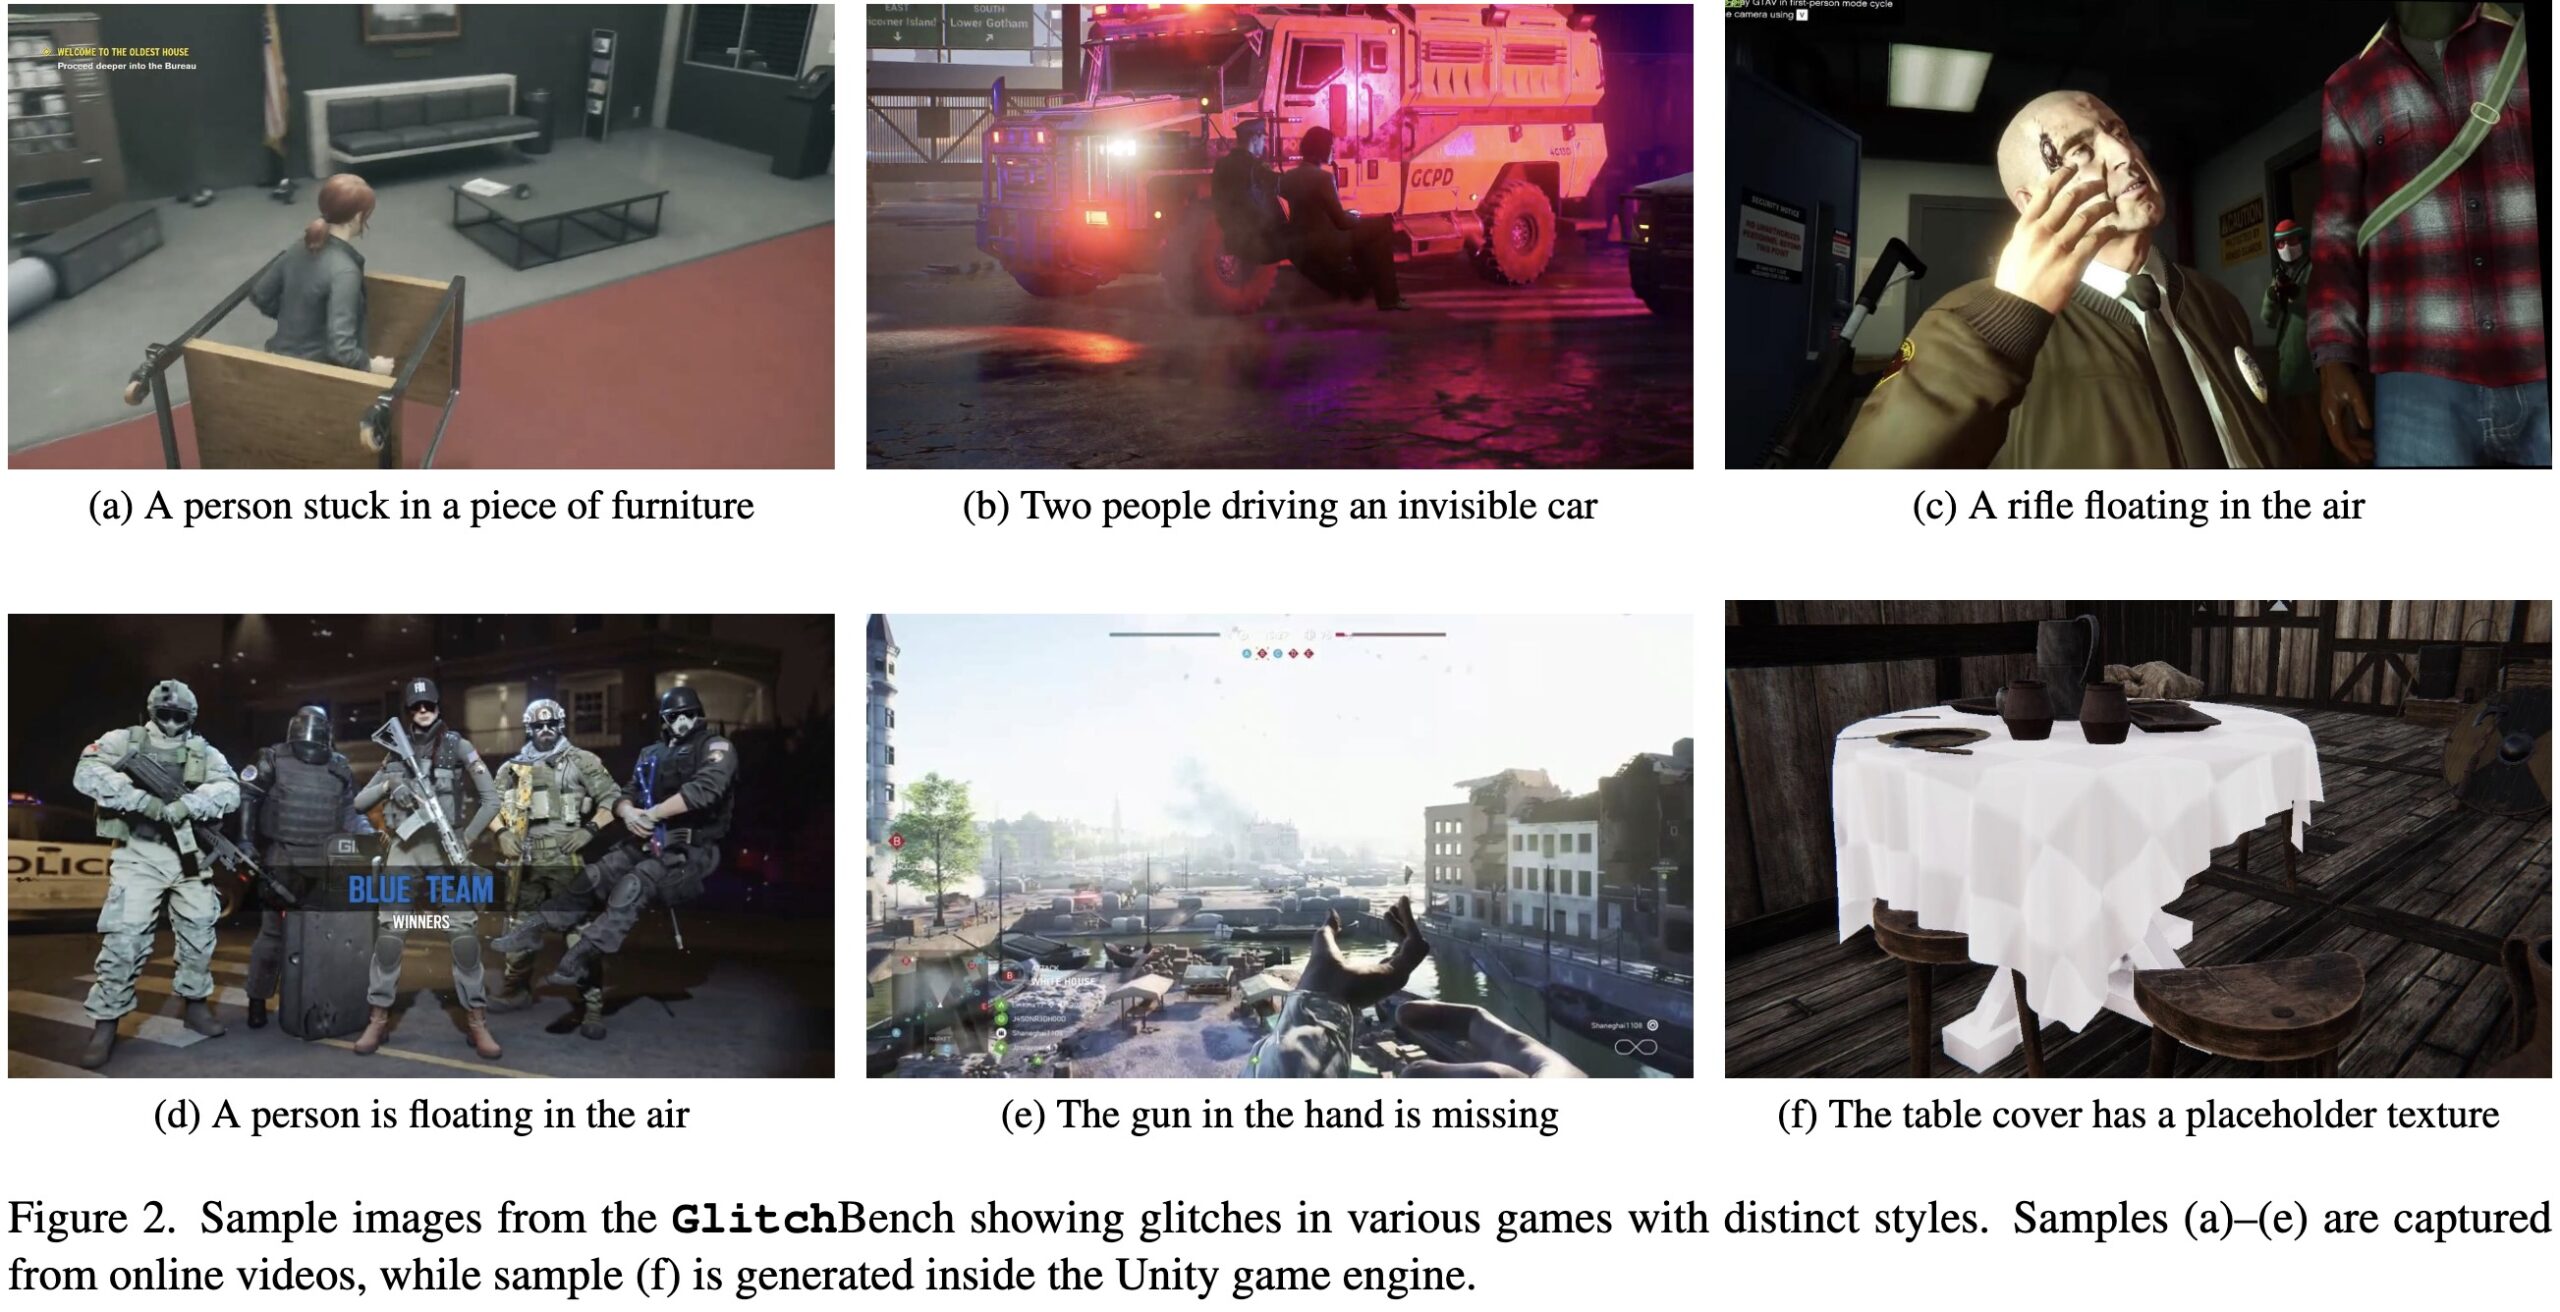 Figure 2: Sample images from the GlitchBench showing glitches in various games with distinct styles. Samples (a)–(e) are captured from online videos, while sample (f) is generated inside the Unity game engine.